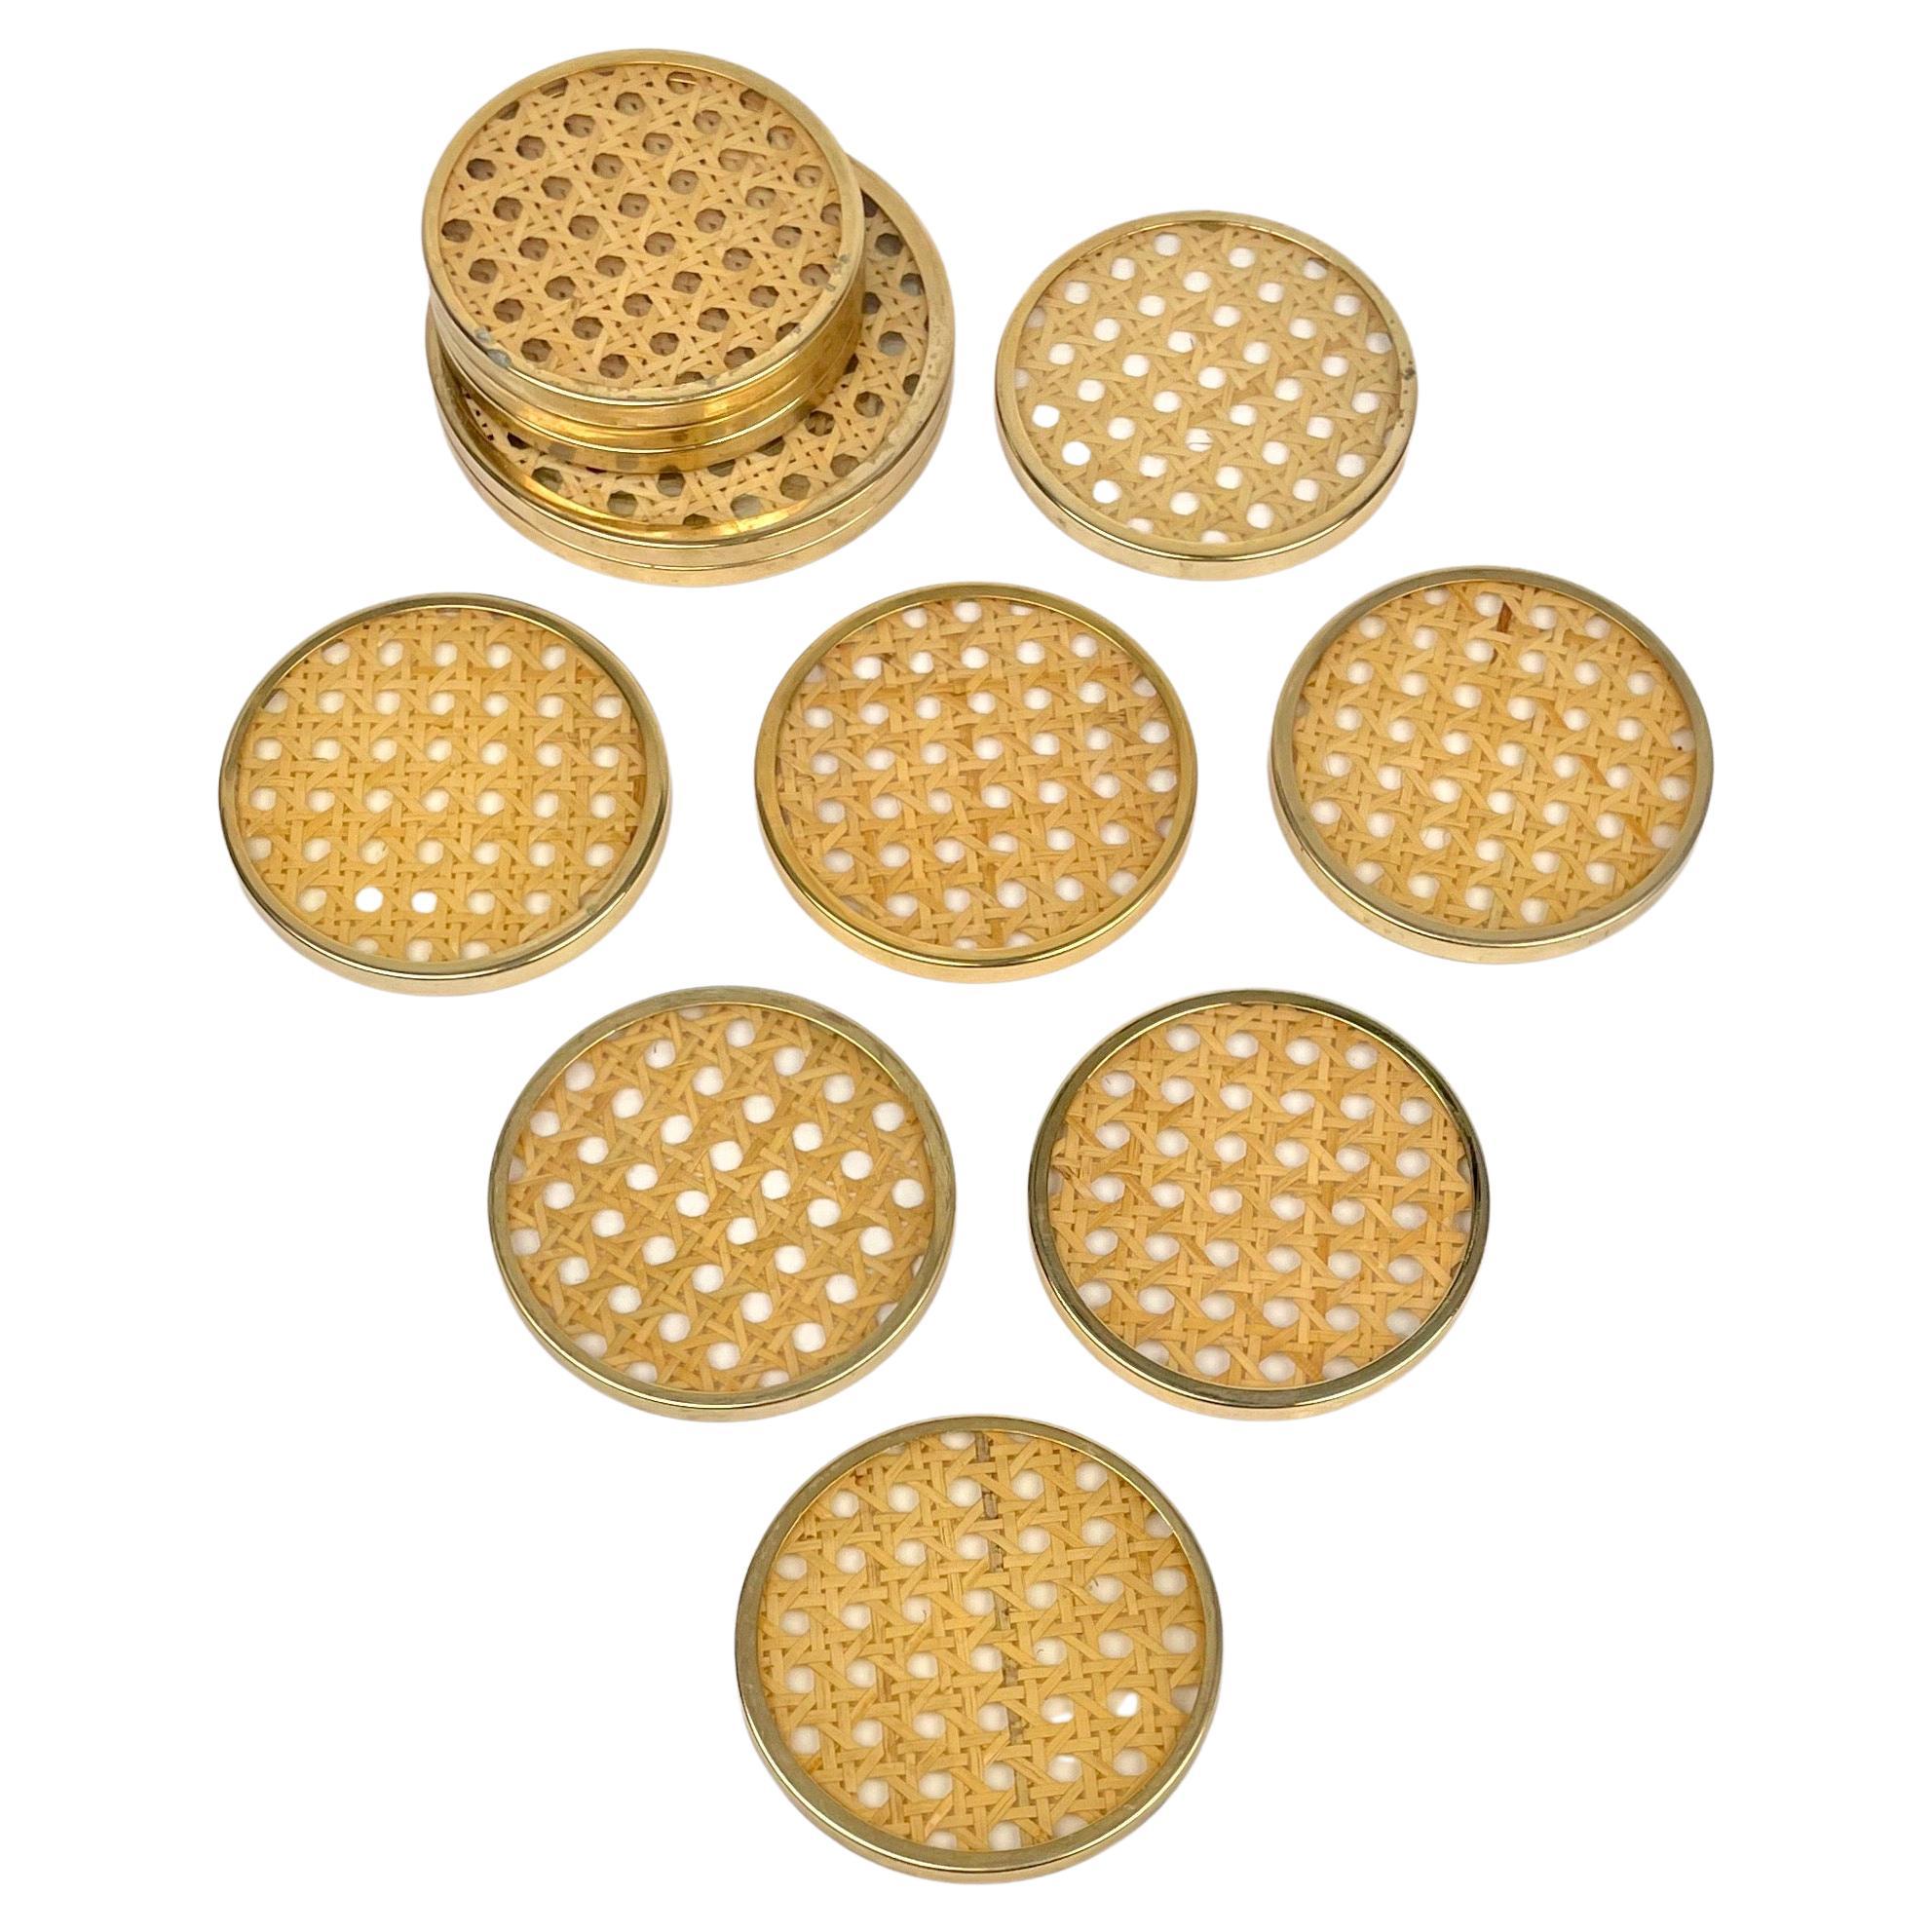 12 total pieces of barware coasters in Lucite and Rattan with a brass frame in the style of Christian Dior Home.

Made in Italy in the 1970s.

Dimensions:
- 10 small size for glasses (diameter 10 cm)
- 2 large size for bottles (diameter 12 cm).